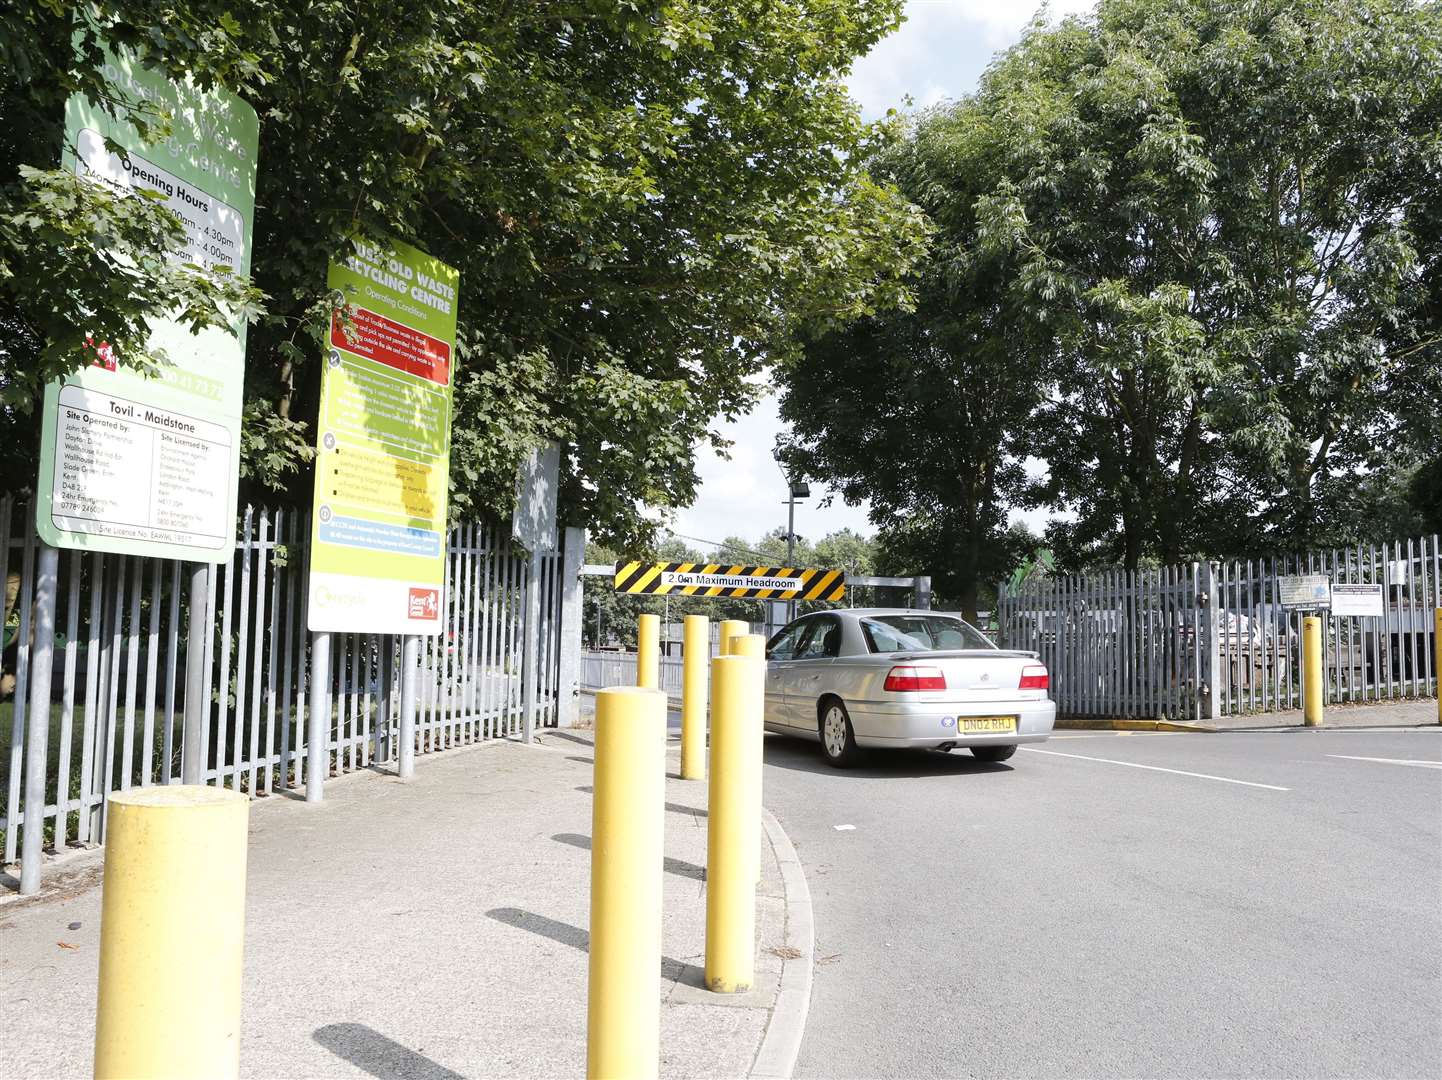 The Tovil Household Waste Recycling Centre